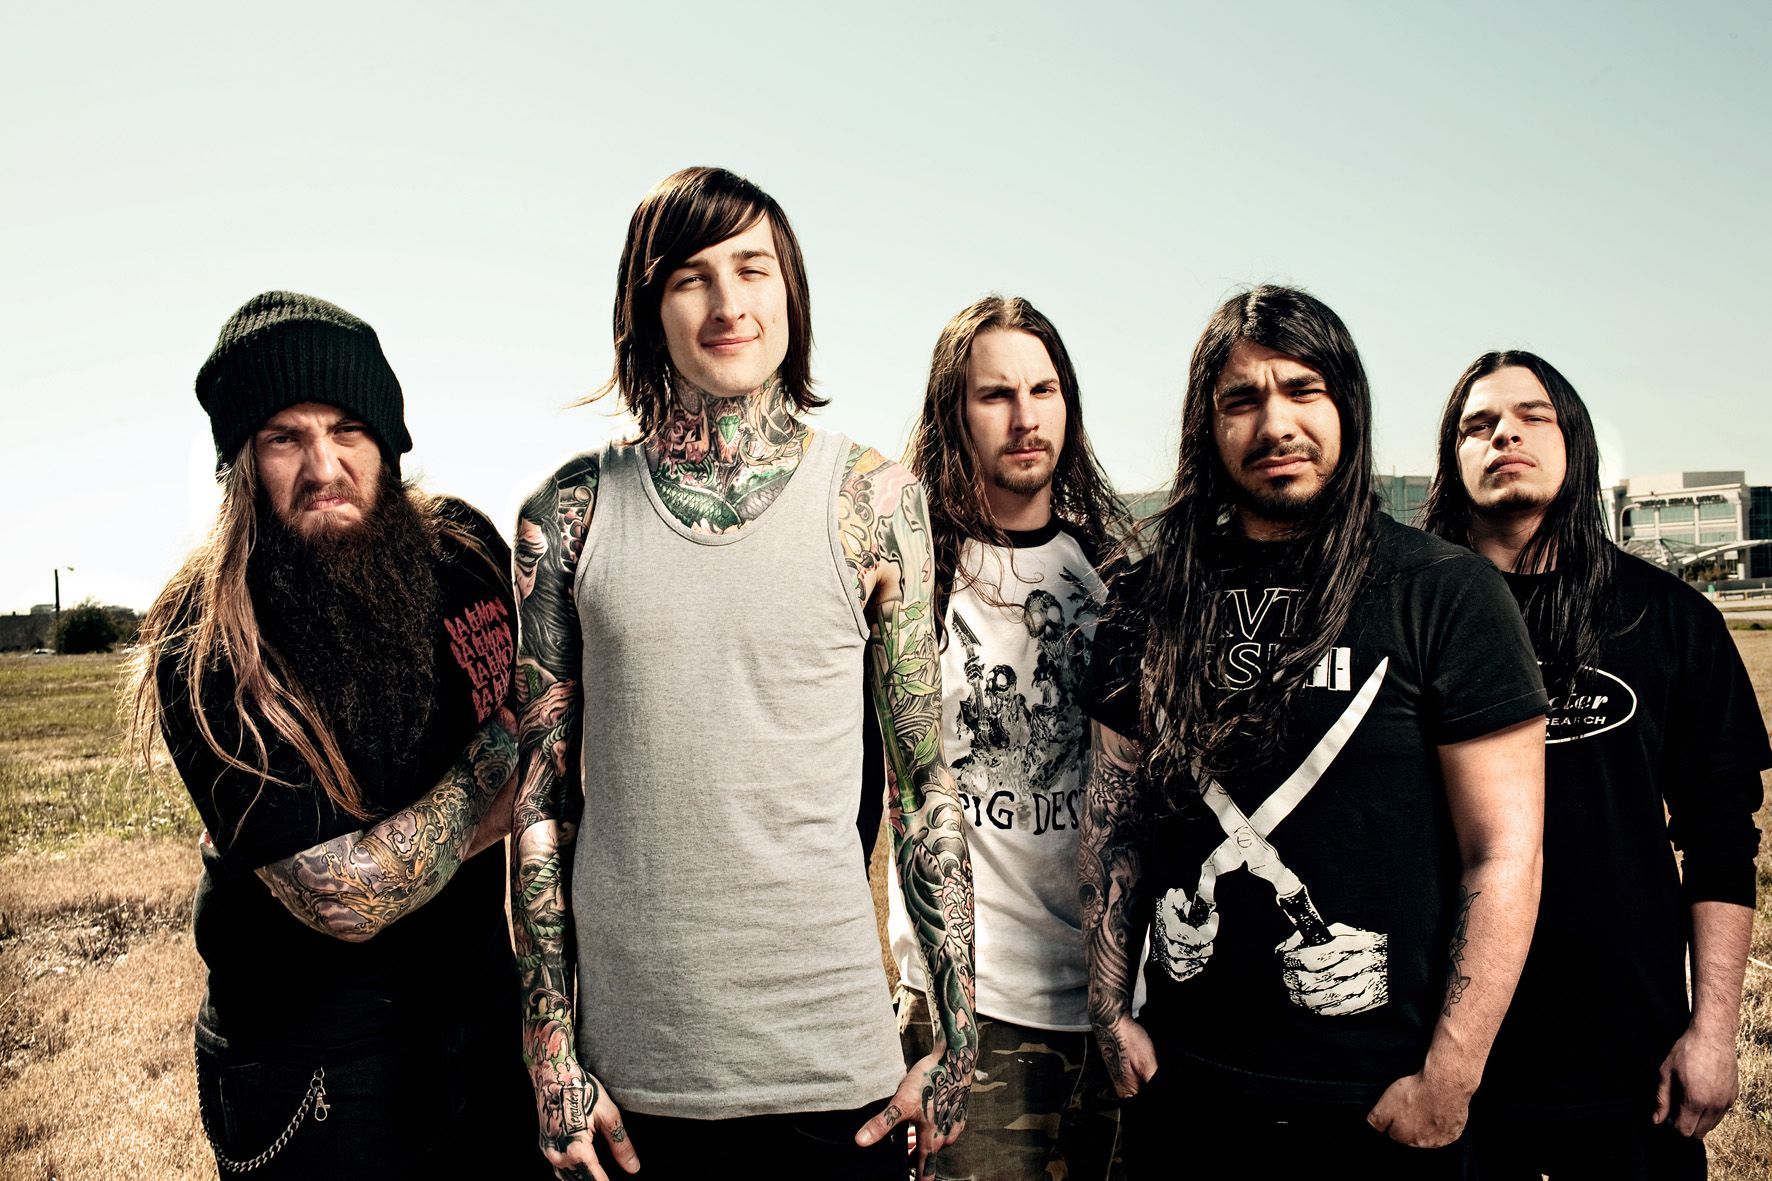 1772x1031px Suicide Silence 571.9 KB